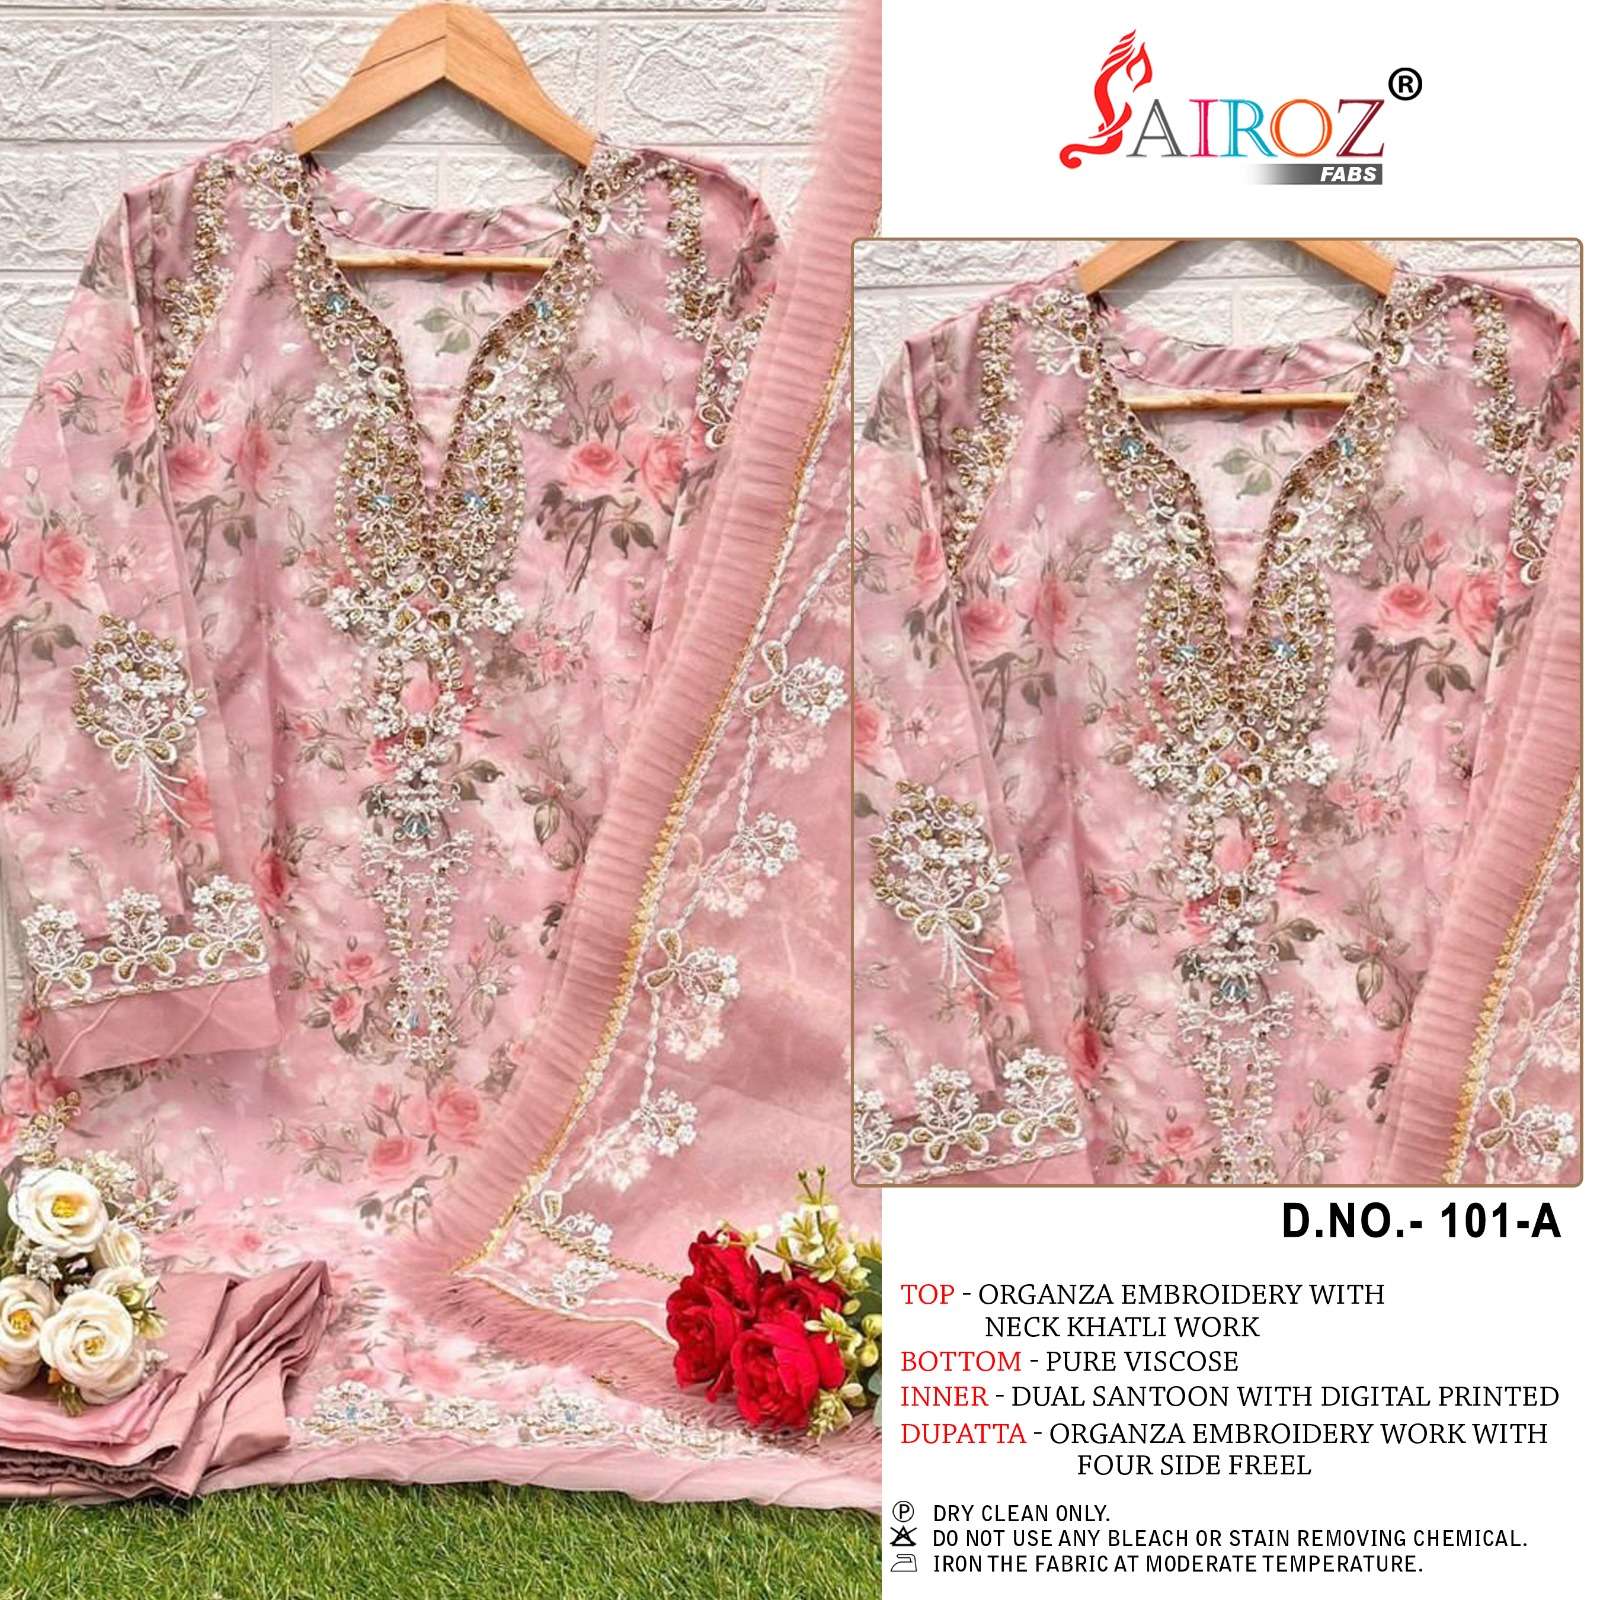 sairoz fabs readymade collection organza embroidery with neck khatli work readymade pakistani suit collection handwork embroidery partywear pakistani suit  